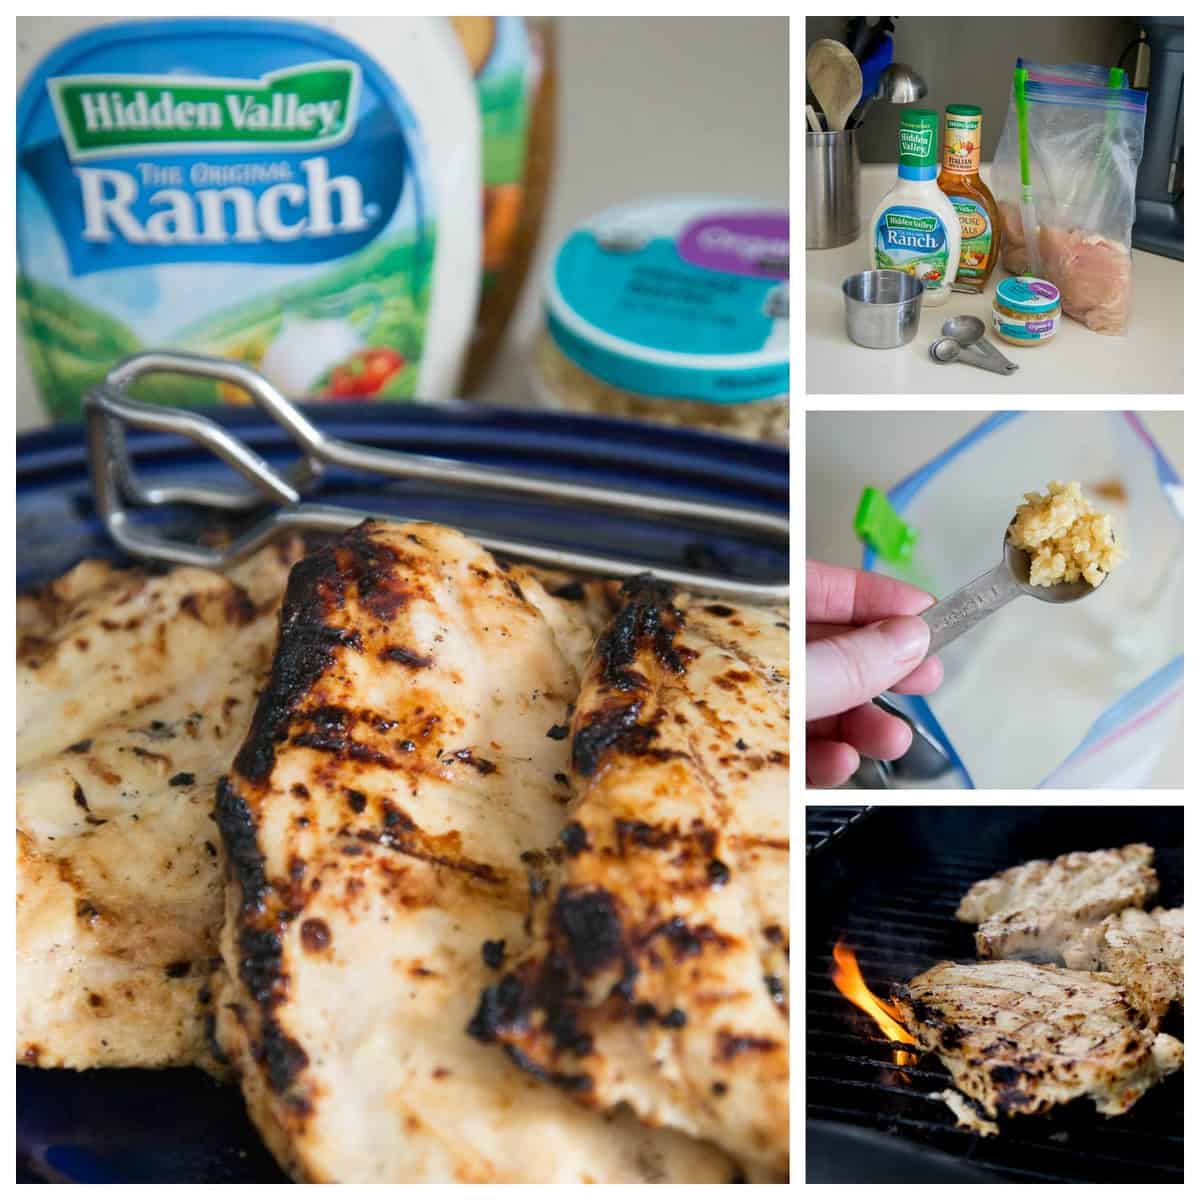 Garlic Ranch Grilled Chicken *This marinade recipe is SO SIMPLE. Love that you can use the leftovers in so many different ways. Great for meal planning.